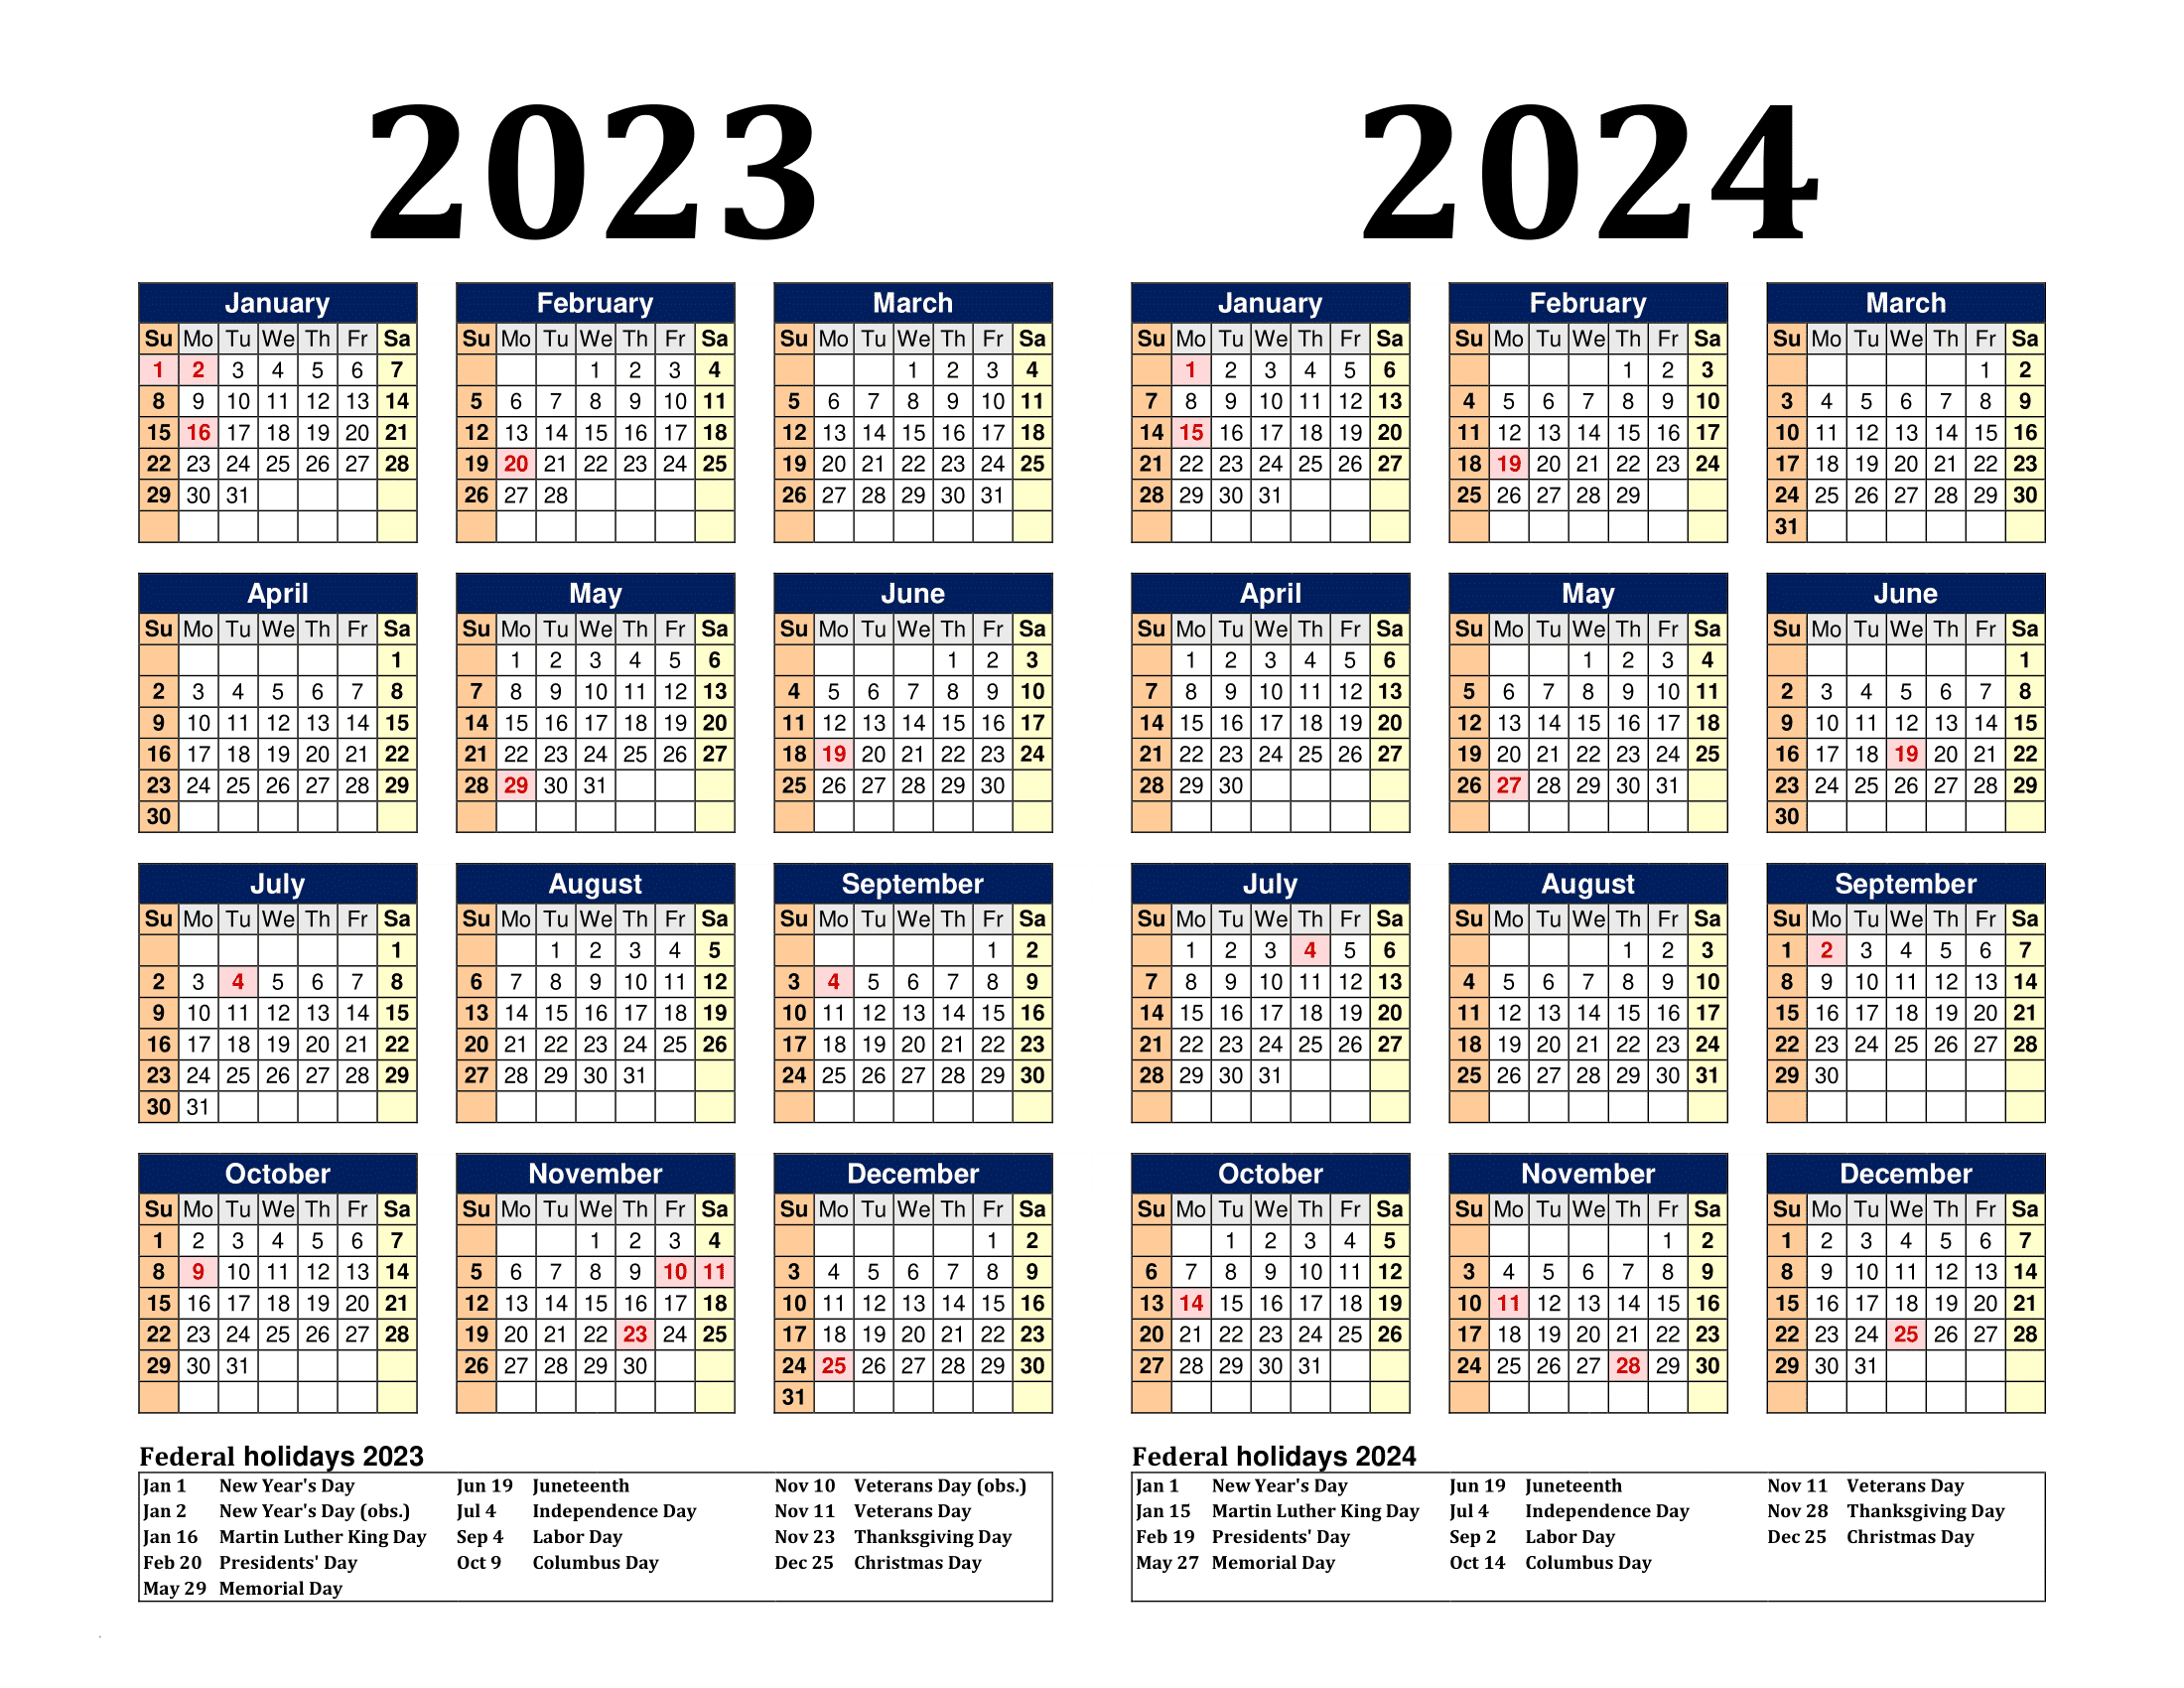 Free Printable Two Year Calendar Templates For 2023 And 2024 In Pdf | 2 Year Printable Calendar 2023 and 2024